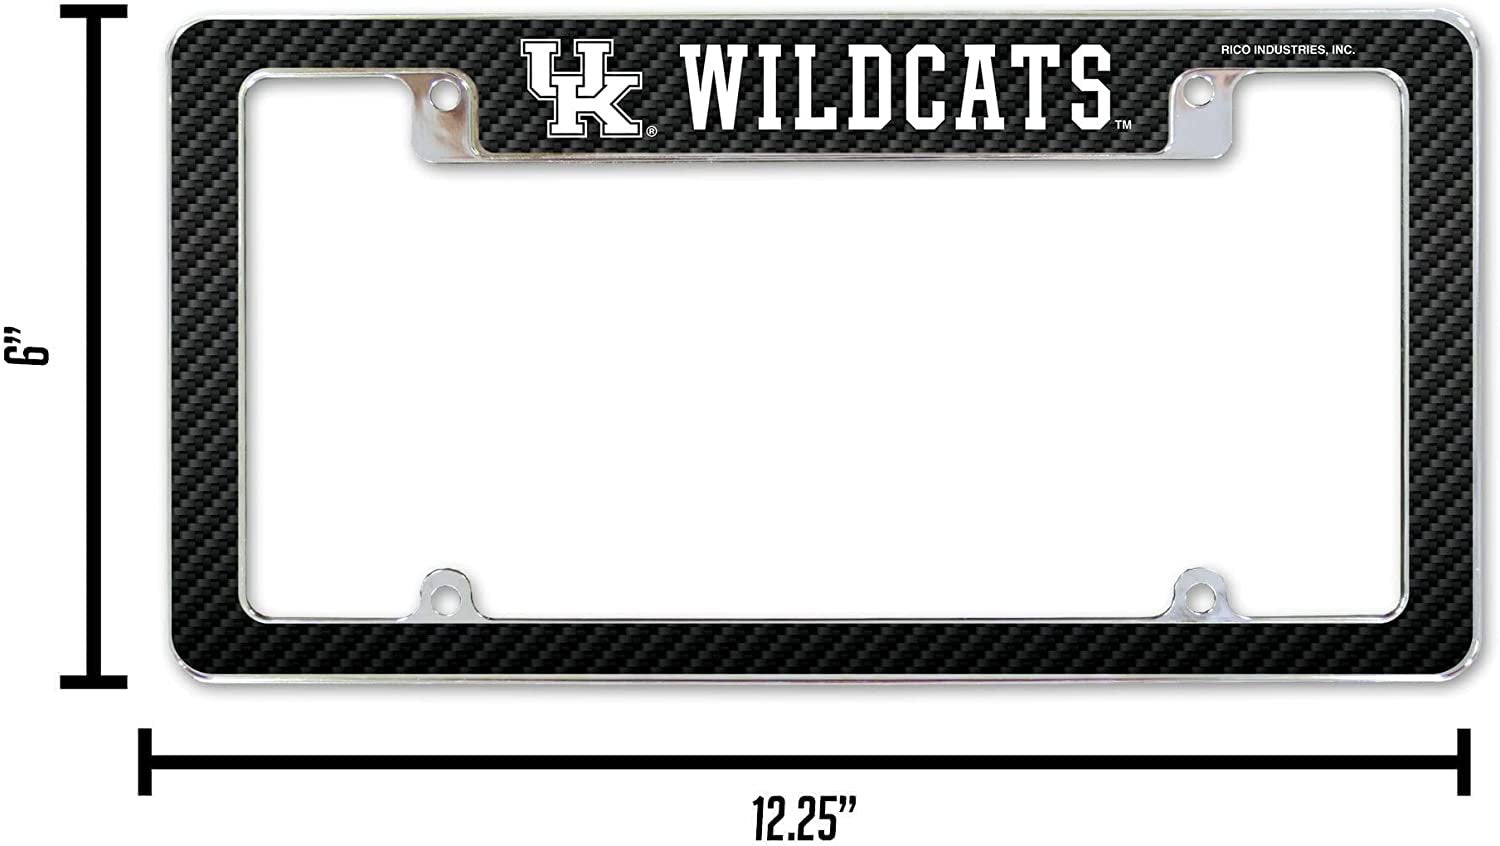 University of Kentucky Wildcats Metal License Plate Frame Chrome Tag Cover Carbon Fiber Design 6x12 Inch